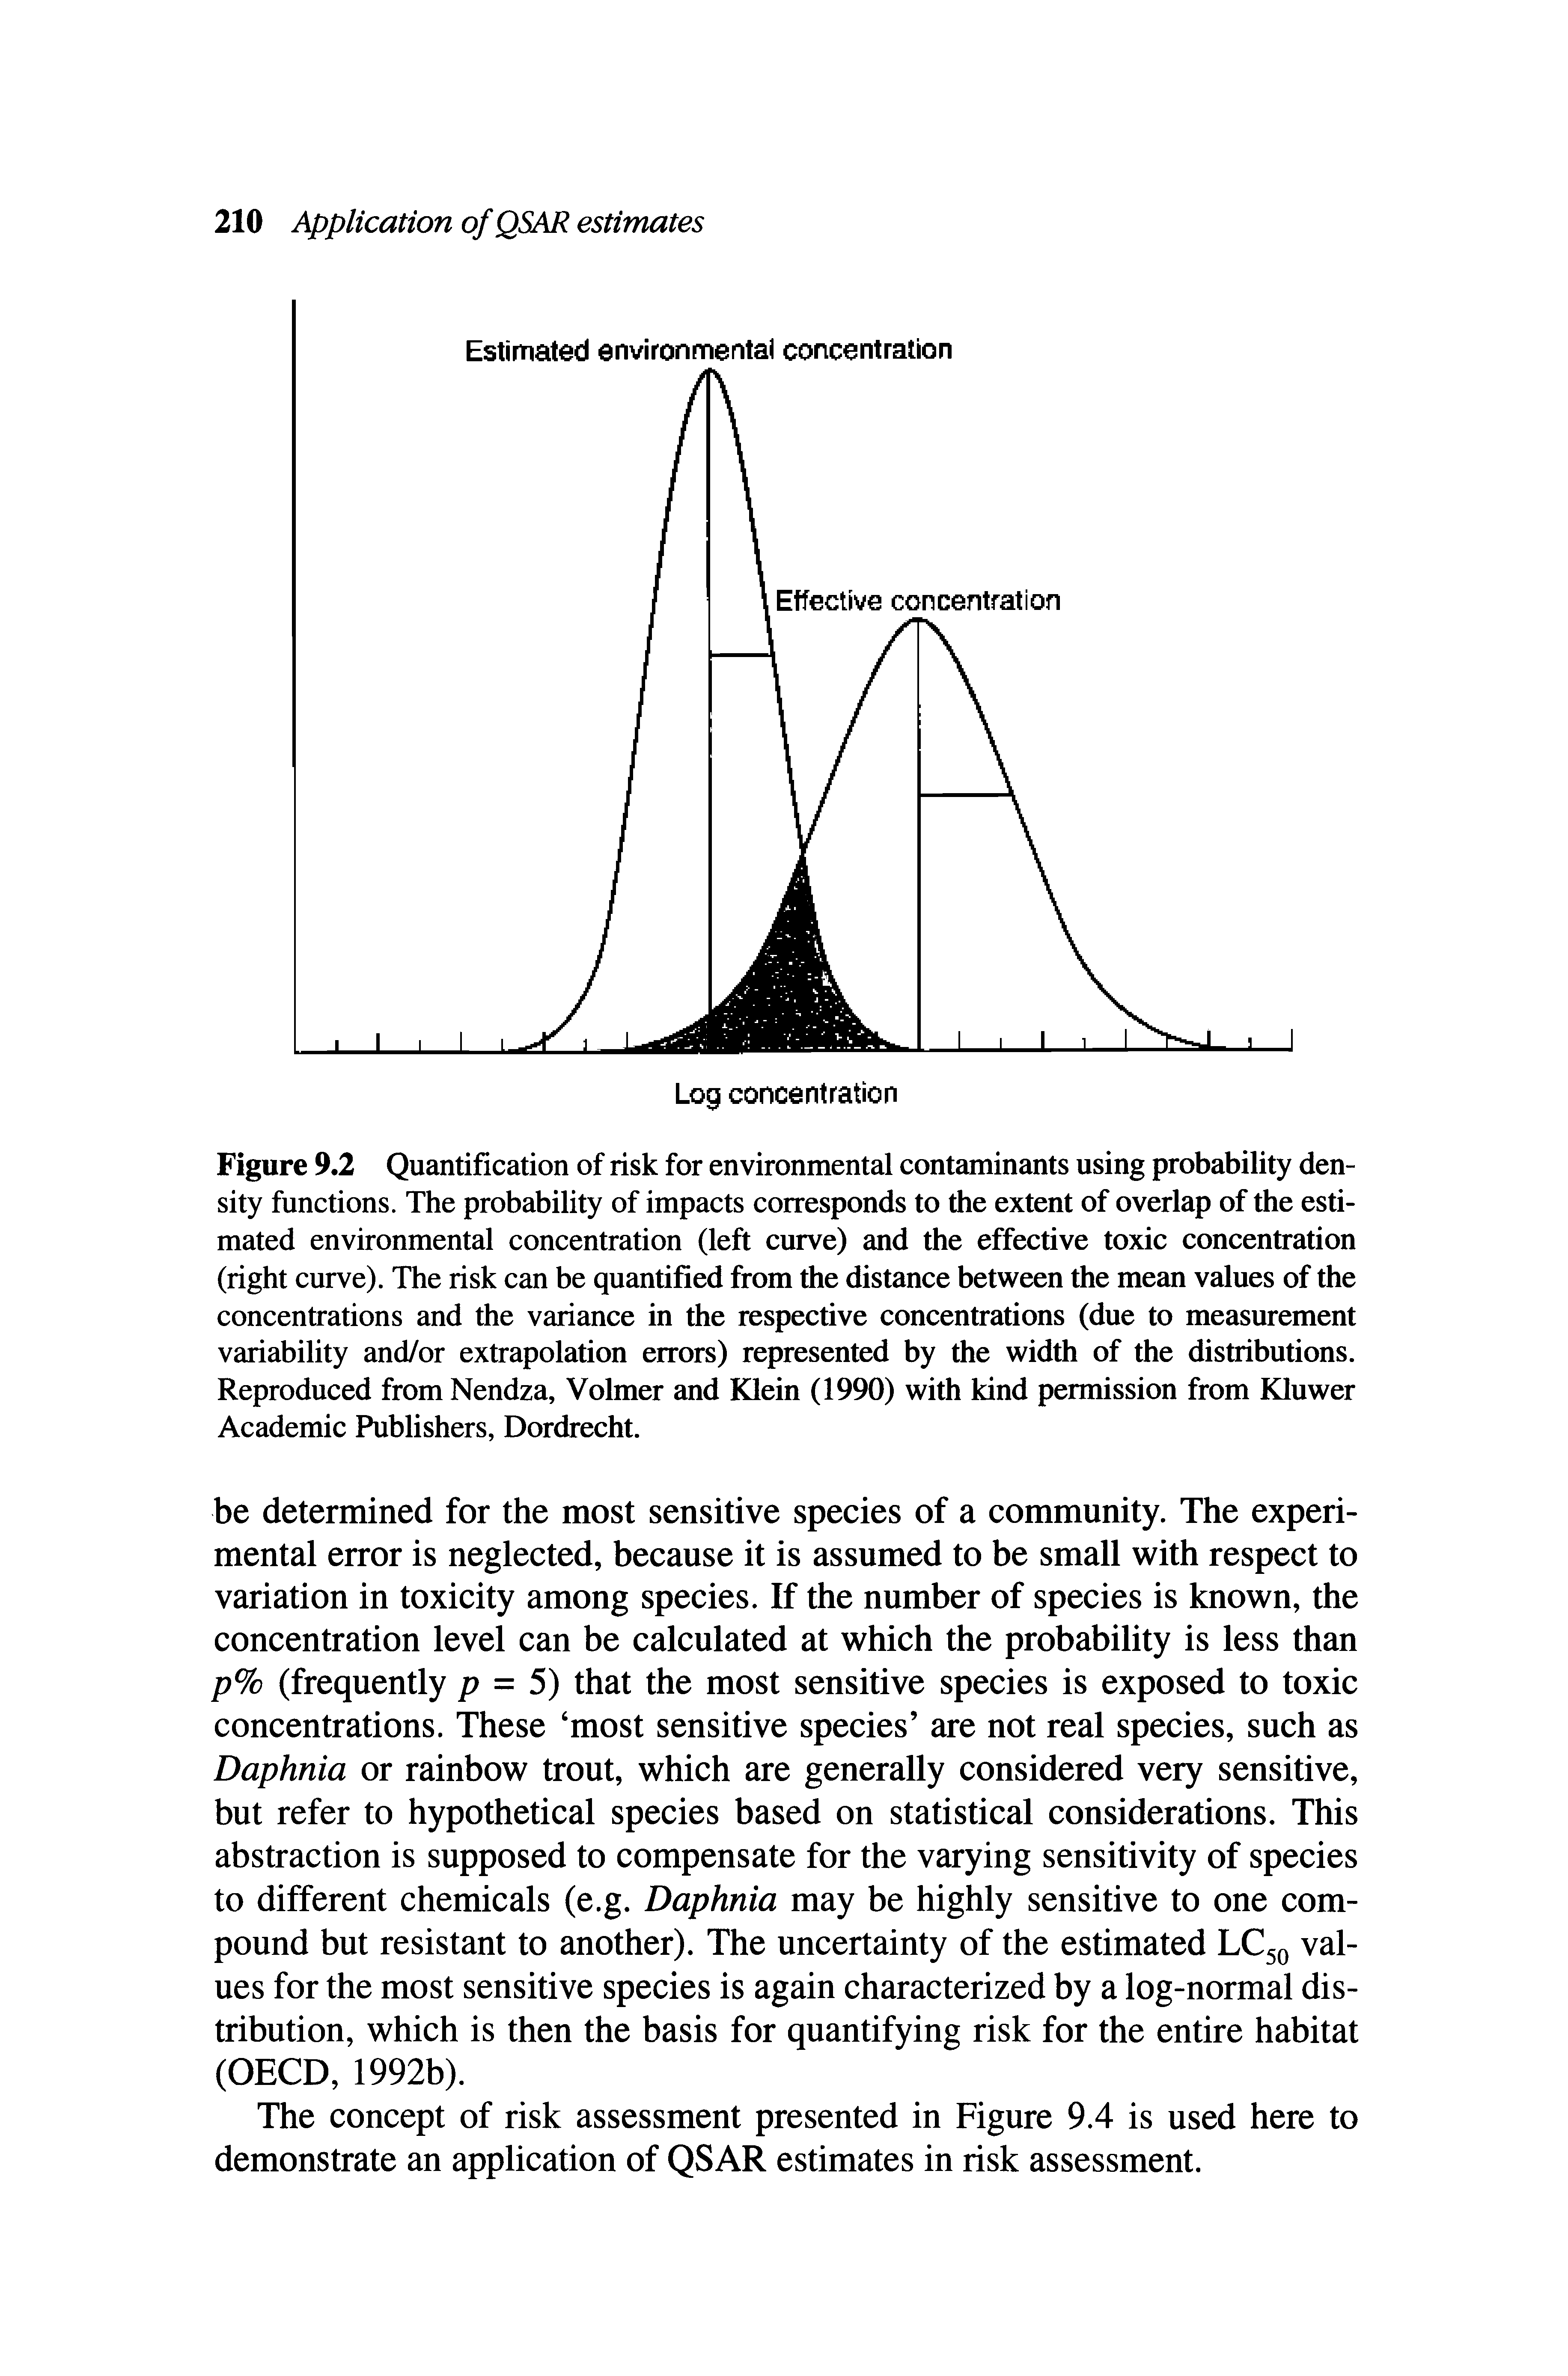 Figure 9.2 Quantification of risk for environmental contaminants using probability density functions. The probability of impacts corresponds to the extent of overlap of the estimated environmental concentration (left curve) and the effective toxic concentration (right curve). The risk can be quantified from the distance between the mean values of the concentrations and the variance in the respective concentrations (due to measurement variability and/or extrapolation errors) represented by the width of the distributions. Reproduced from Nendza, Volmer and Klein (1990) with kind permission from Kluwer Academic Publishers, Dordrecht.